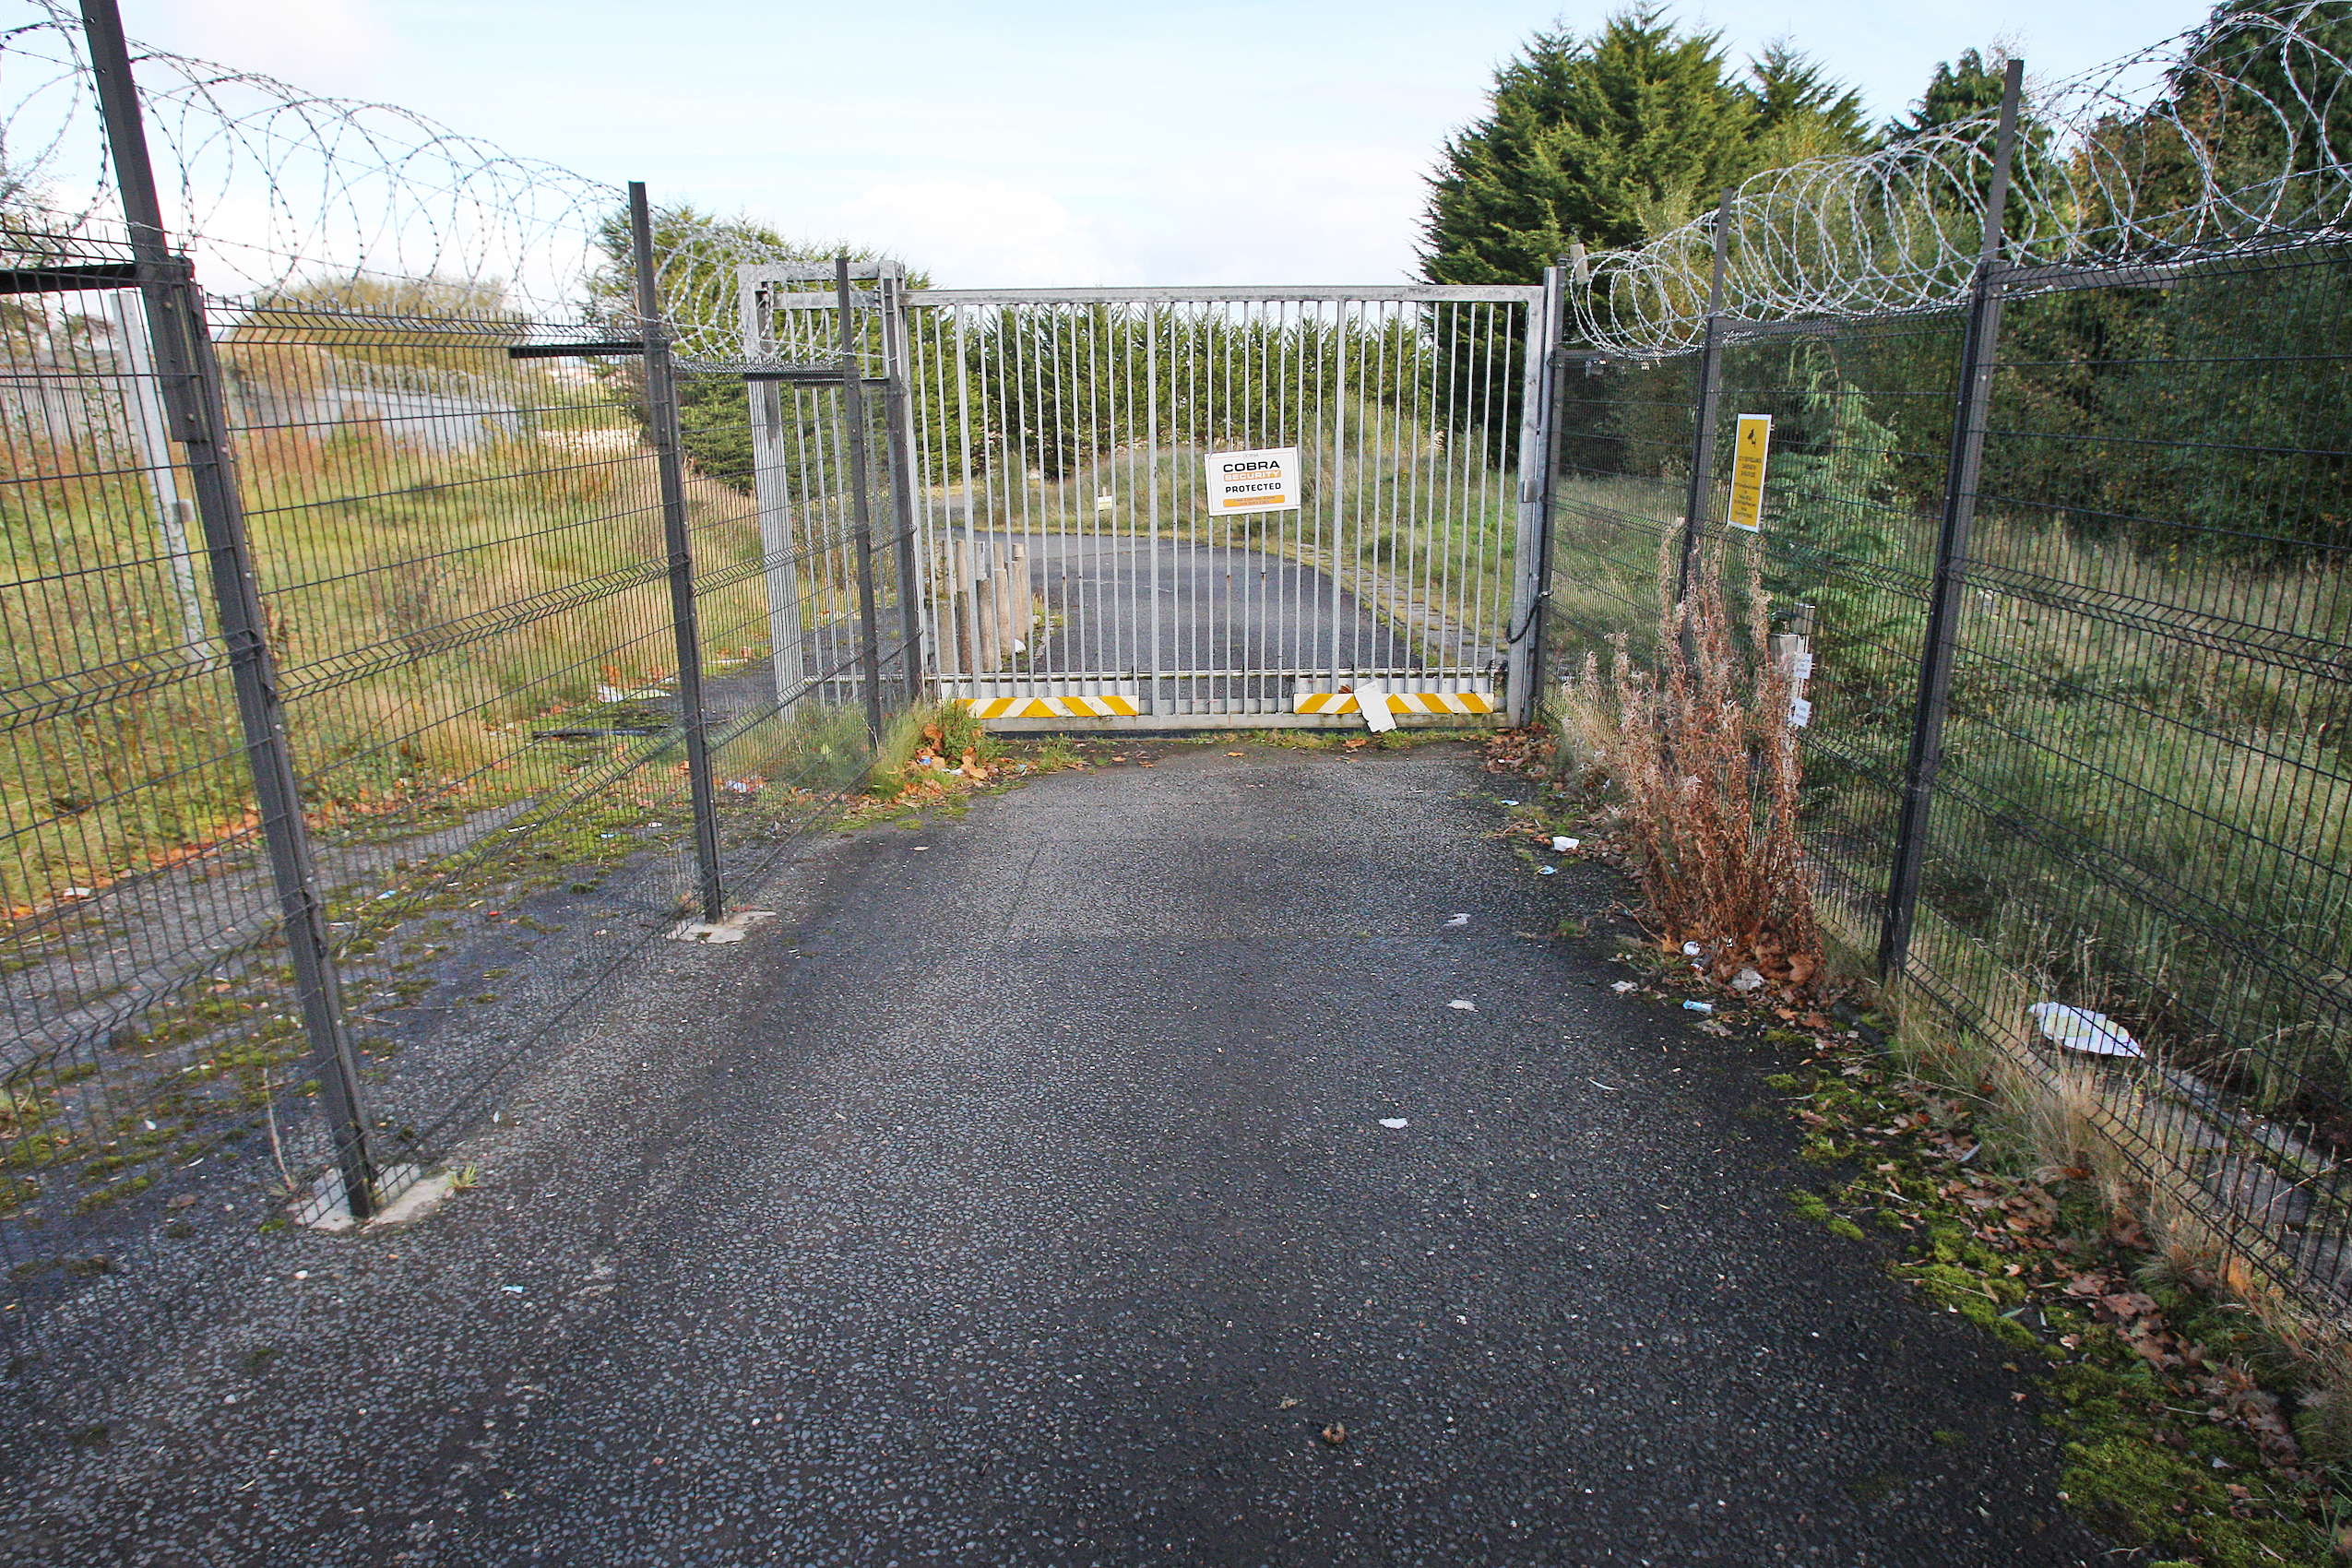 VACANT: The former Visteon factory lies empty in Finaghy